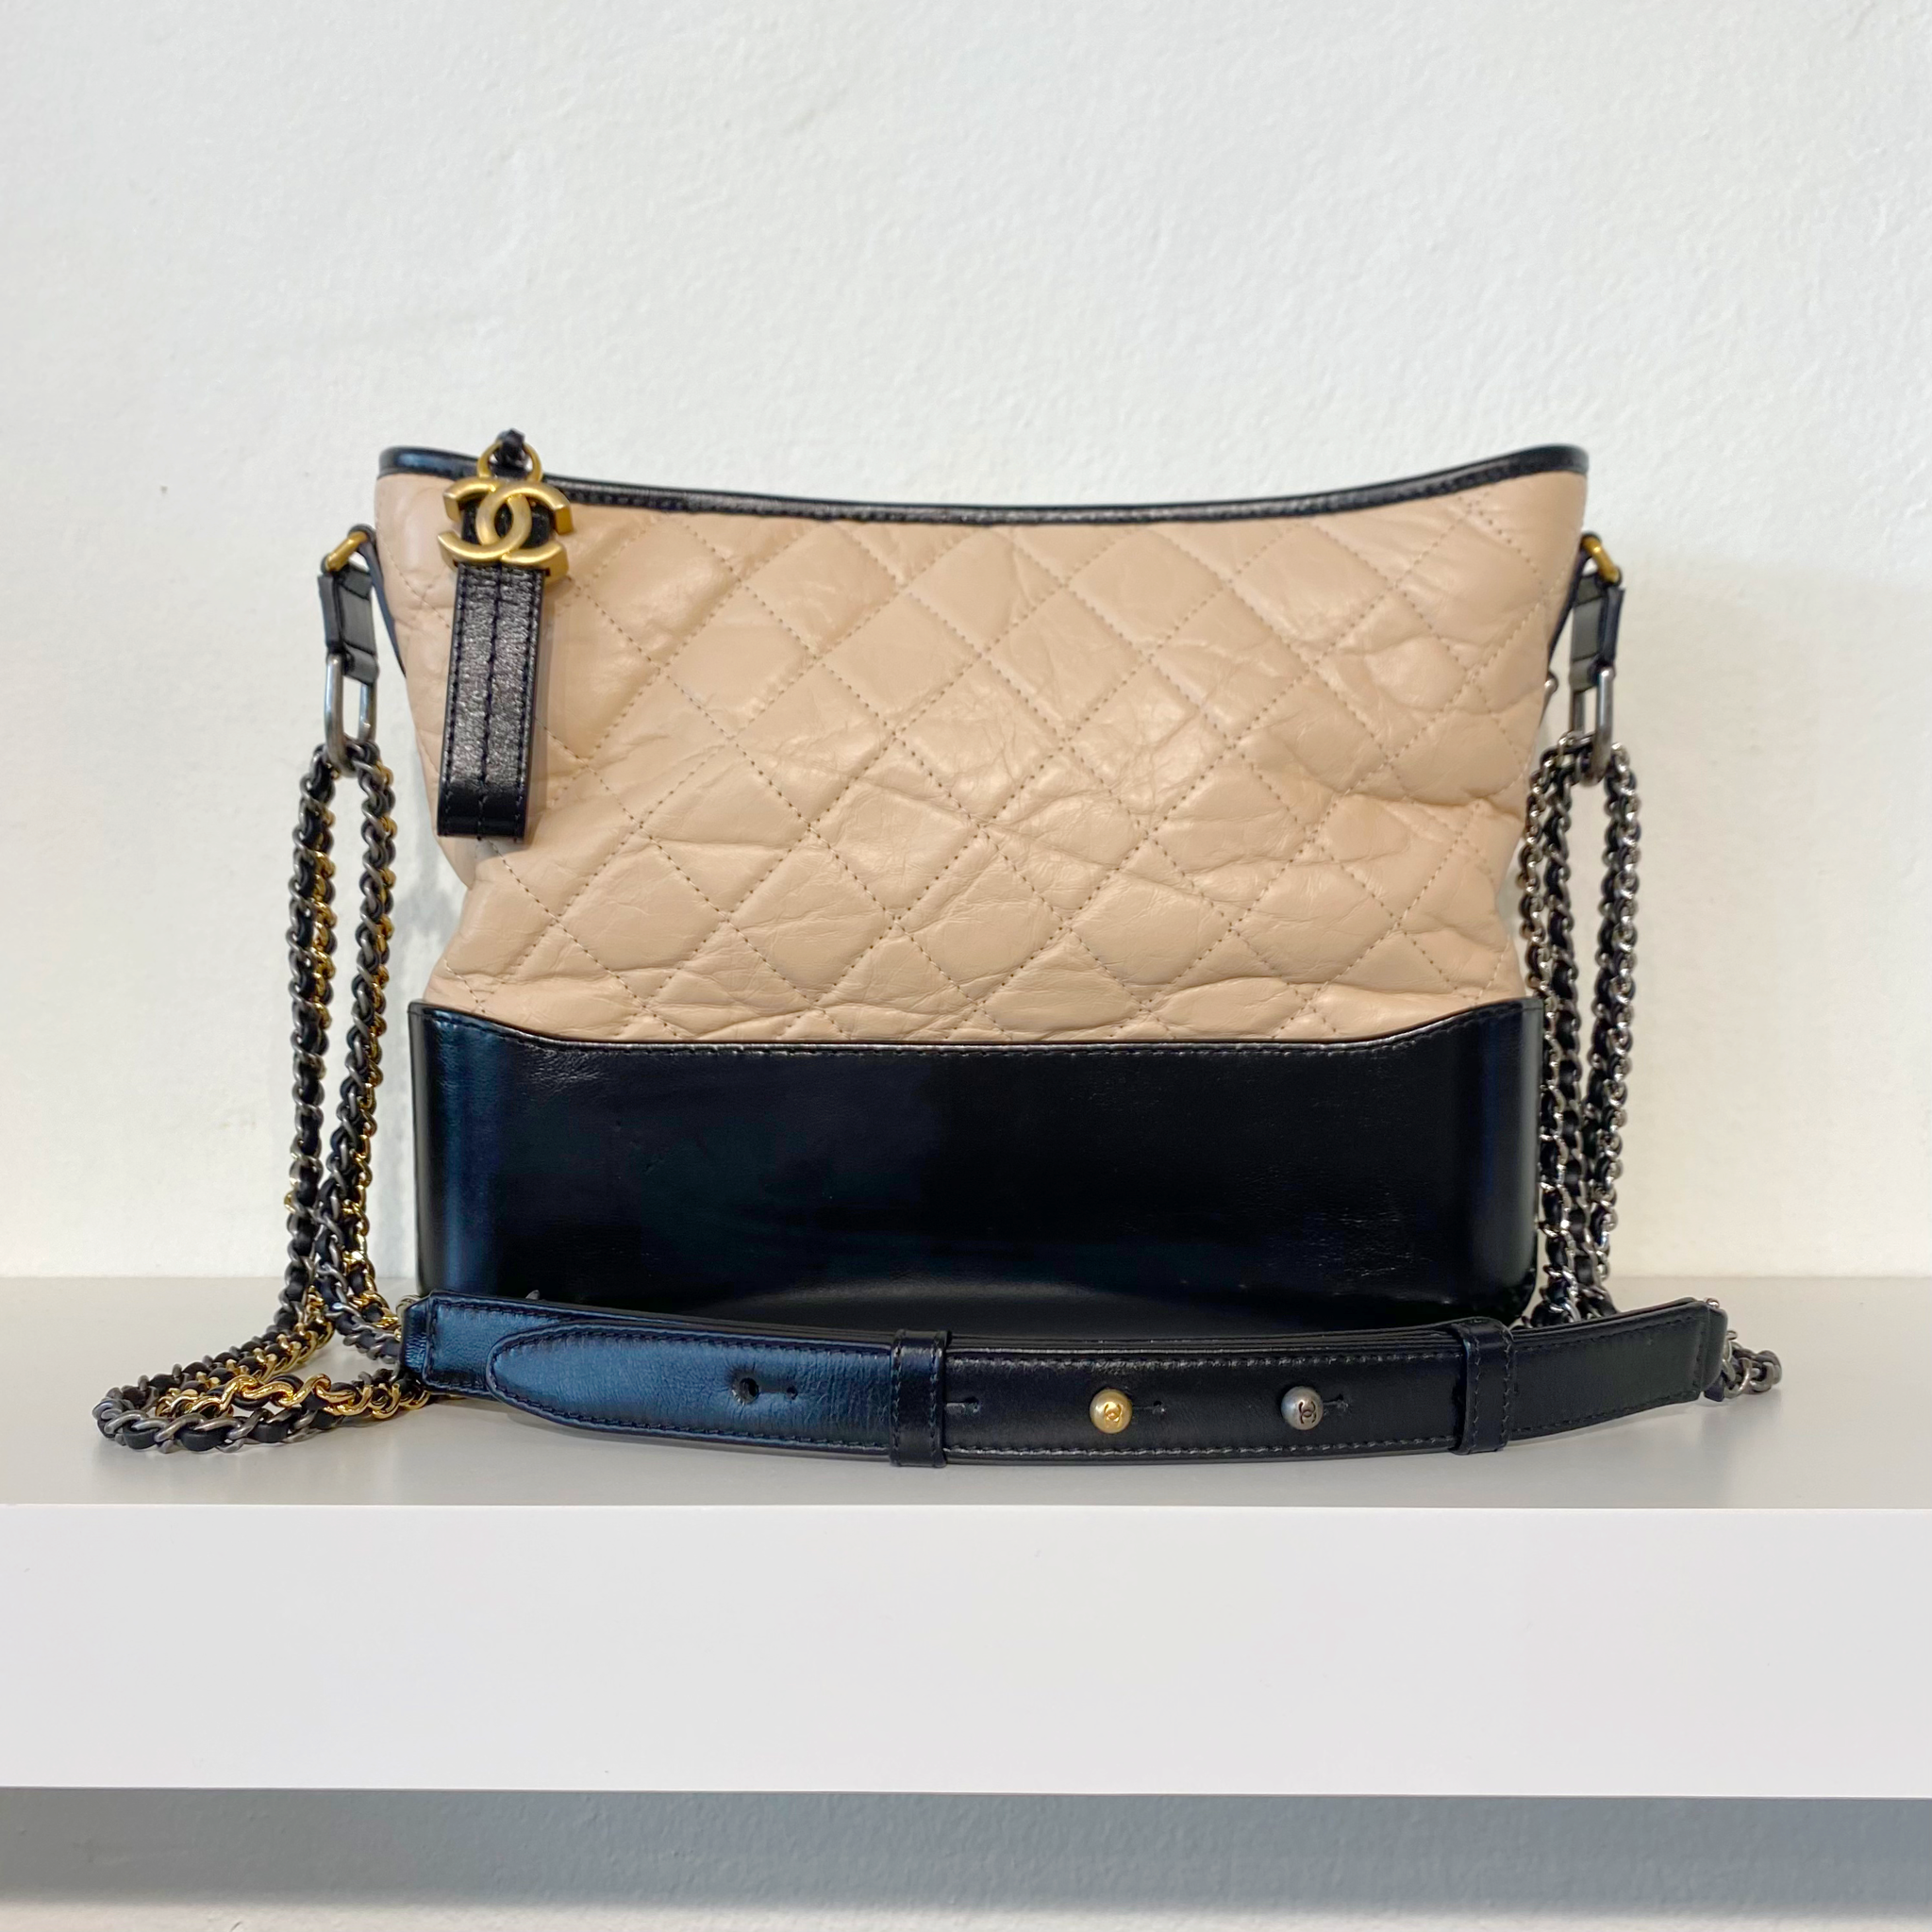 Chanel Gabrielle - 154 For Sale on 1stDibs  chanel gabrielle medium, chanel  gabrielle backpack, chanel gabrielle bag